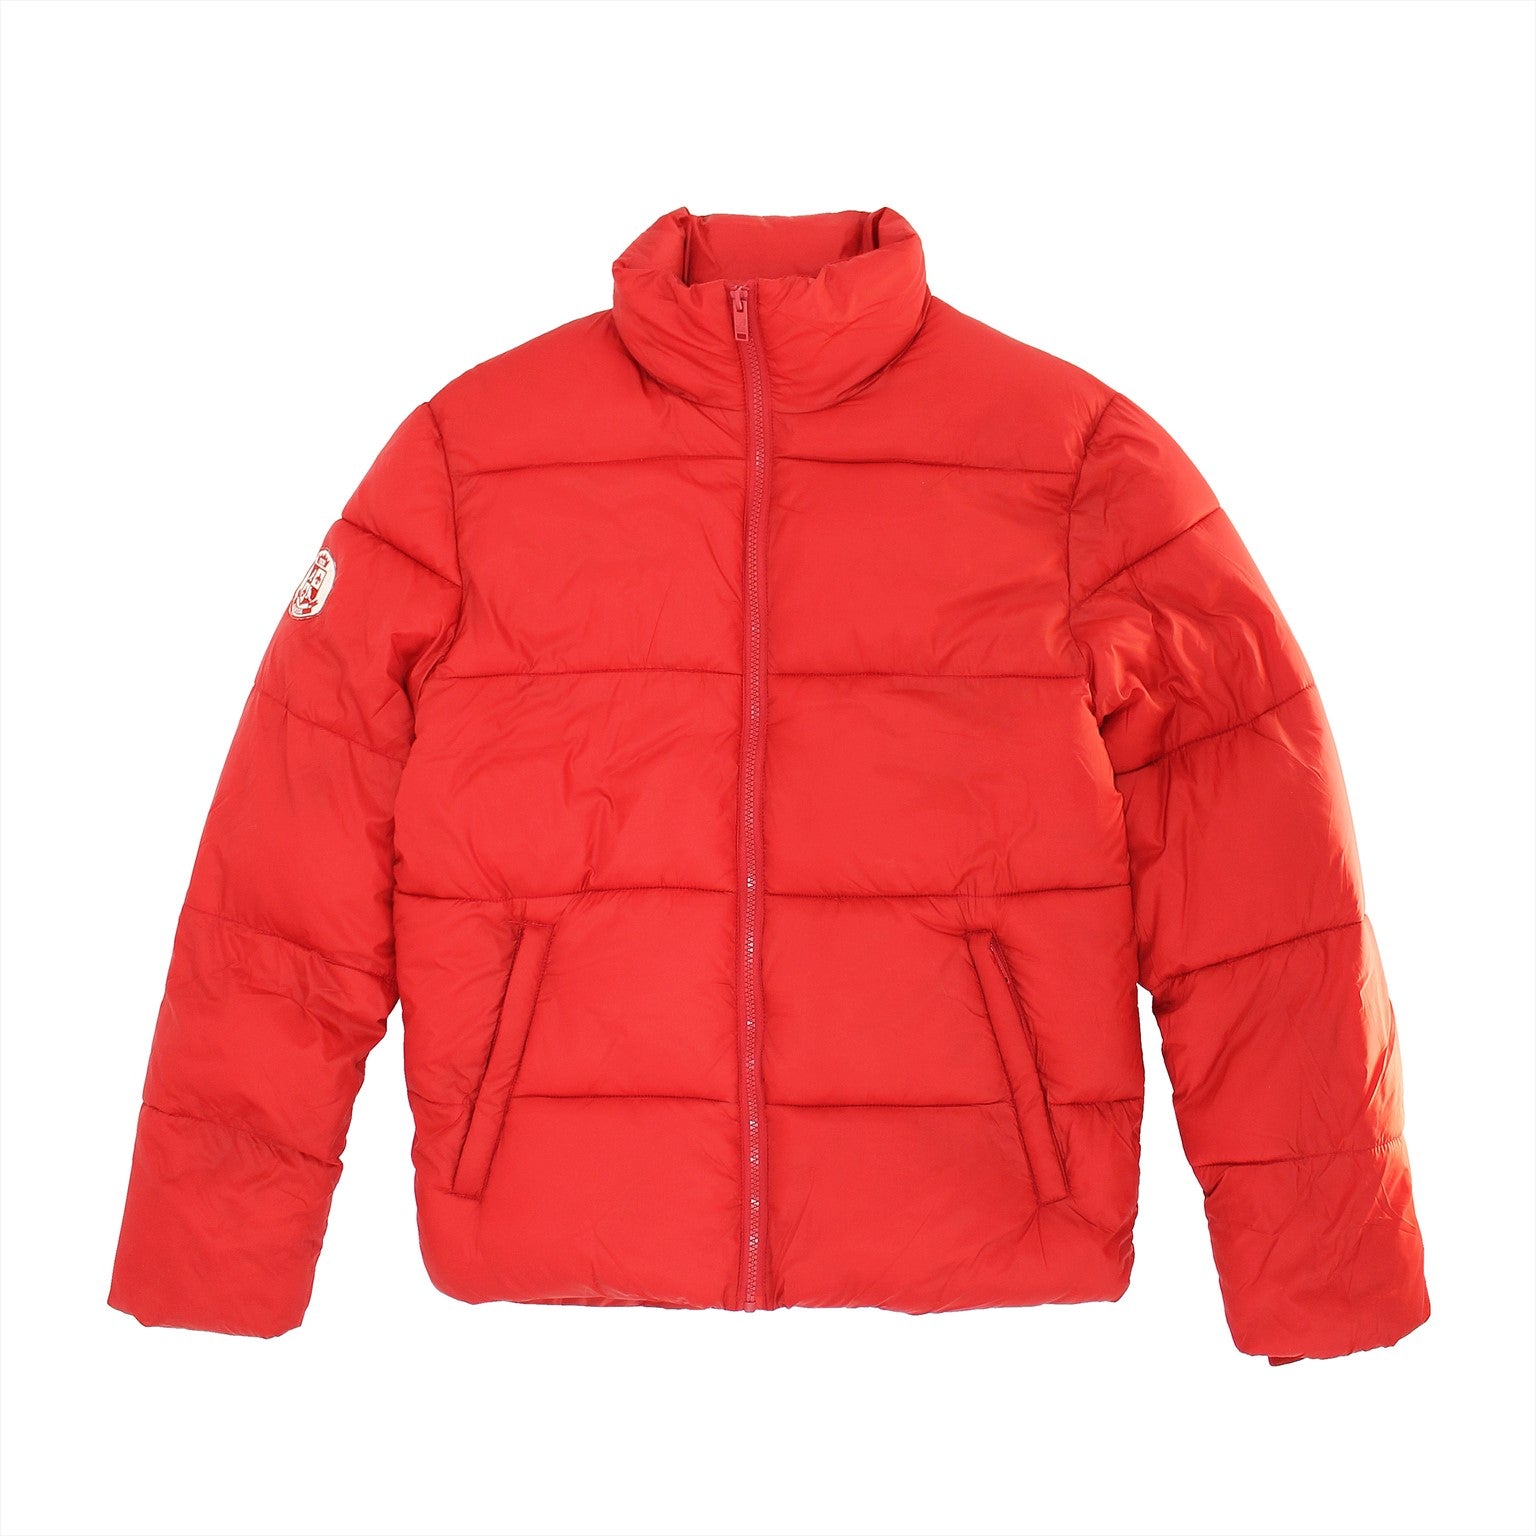 Light down jacket with high collar